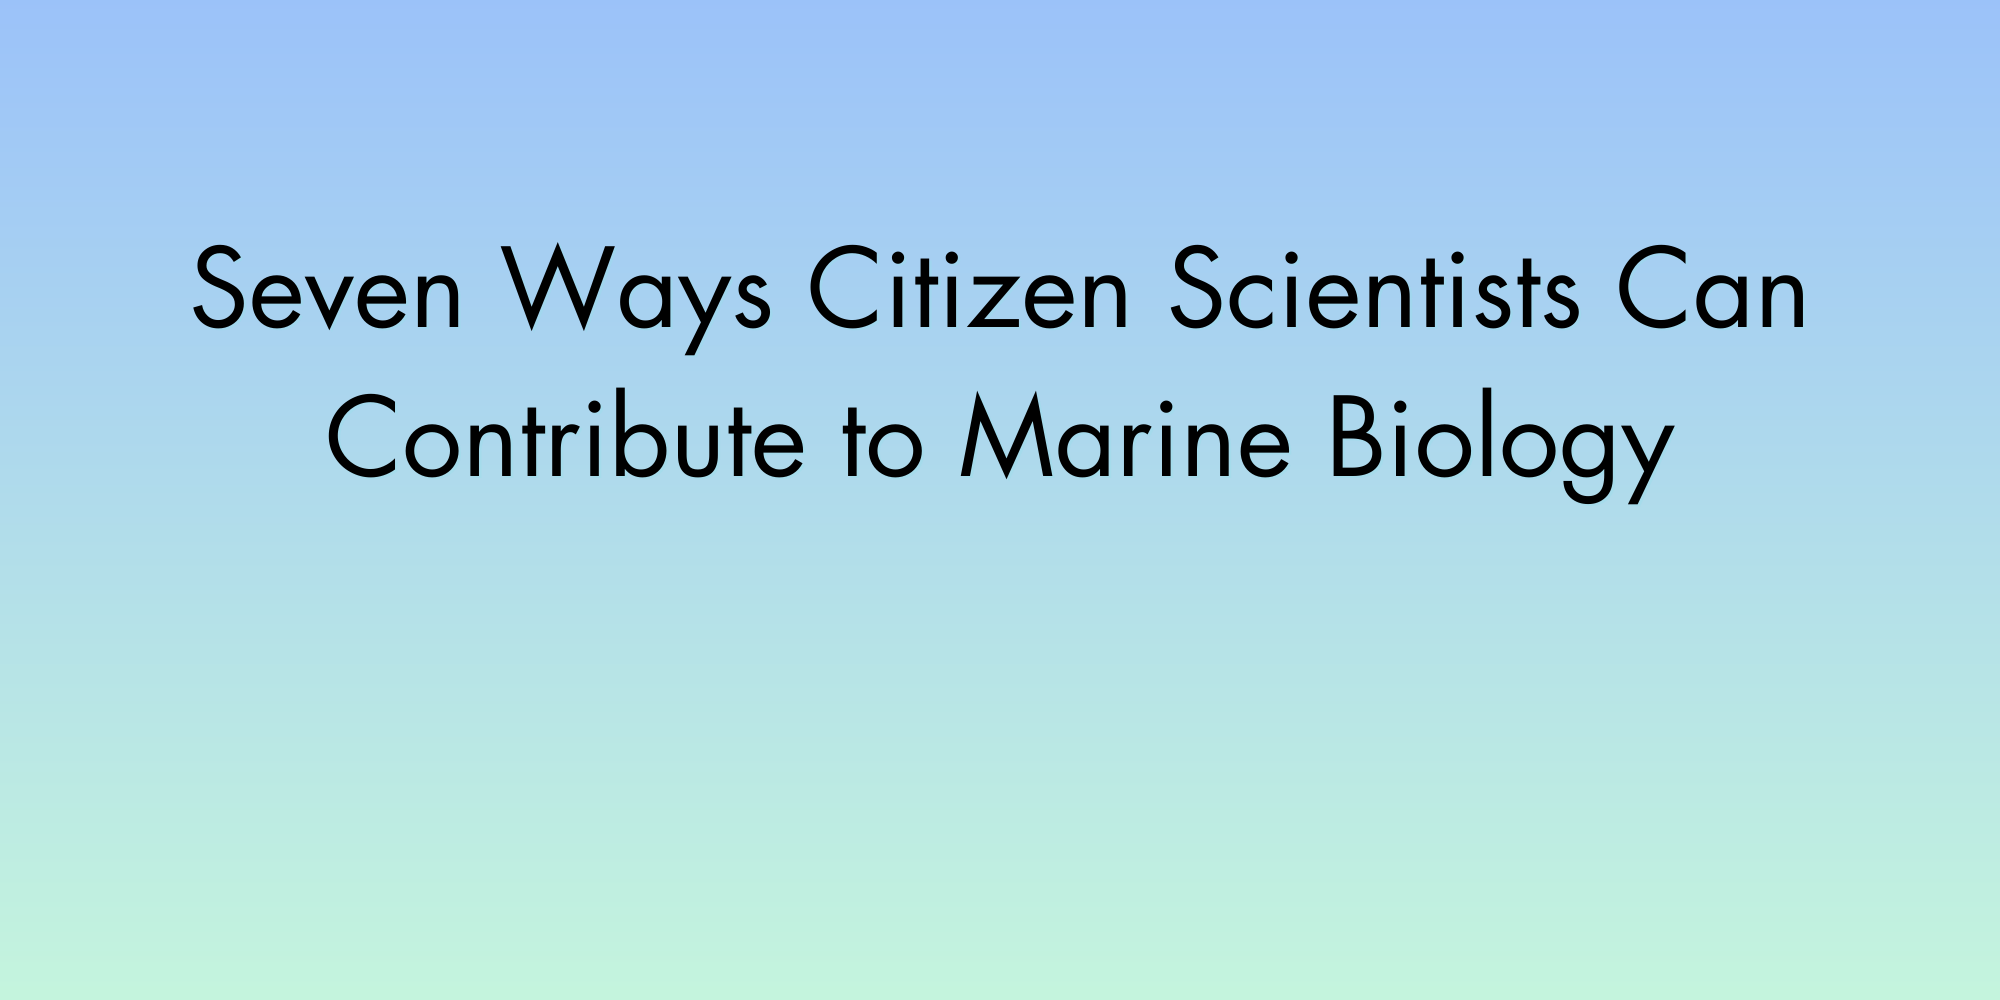 Seven Ways Citizen Scientists Can Contribute to Marine Biology